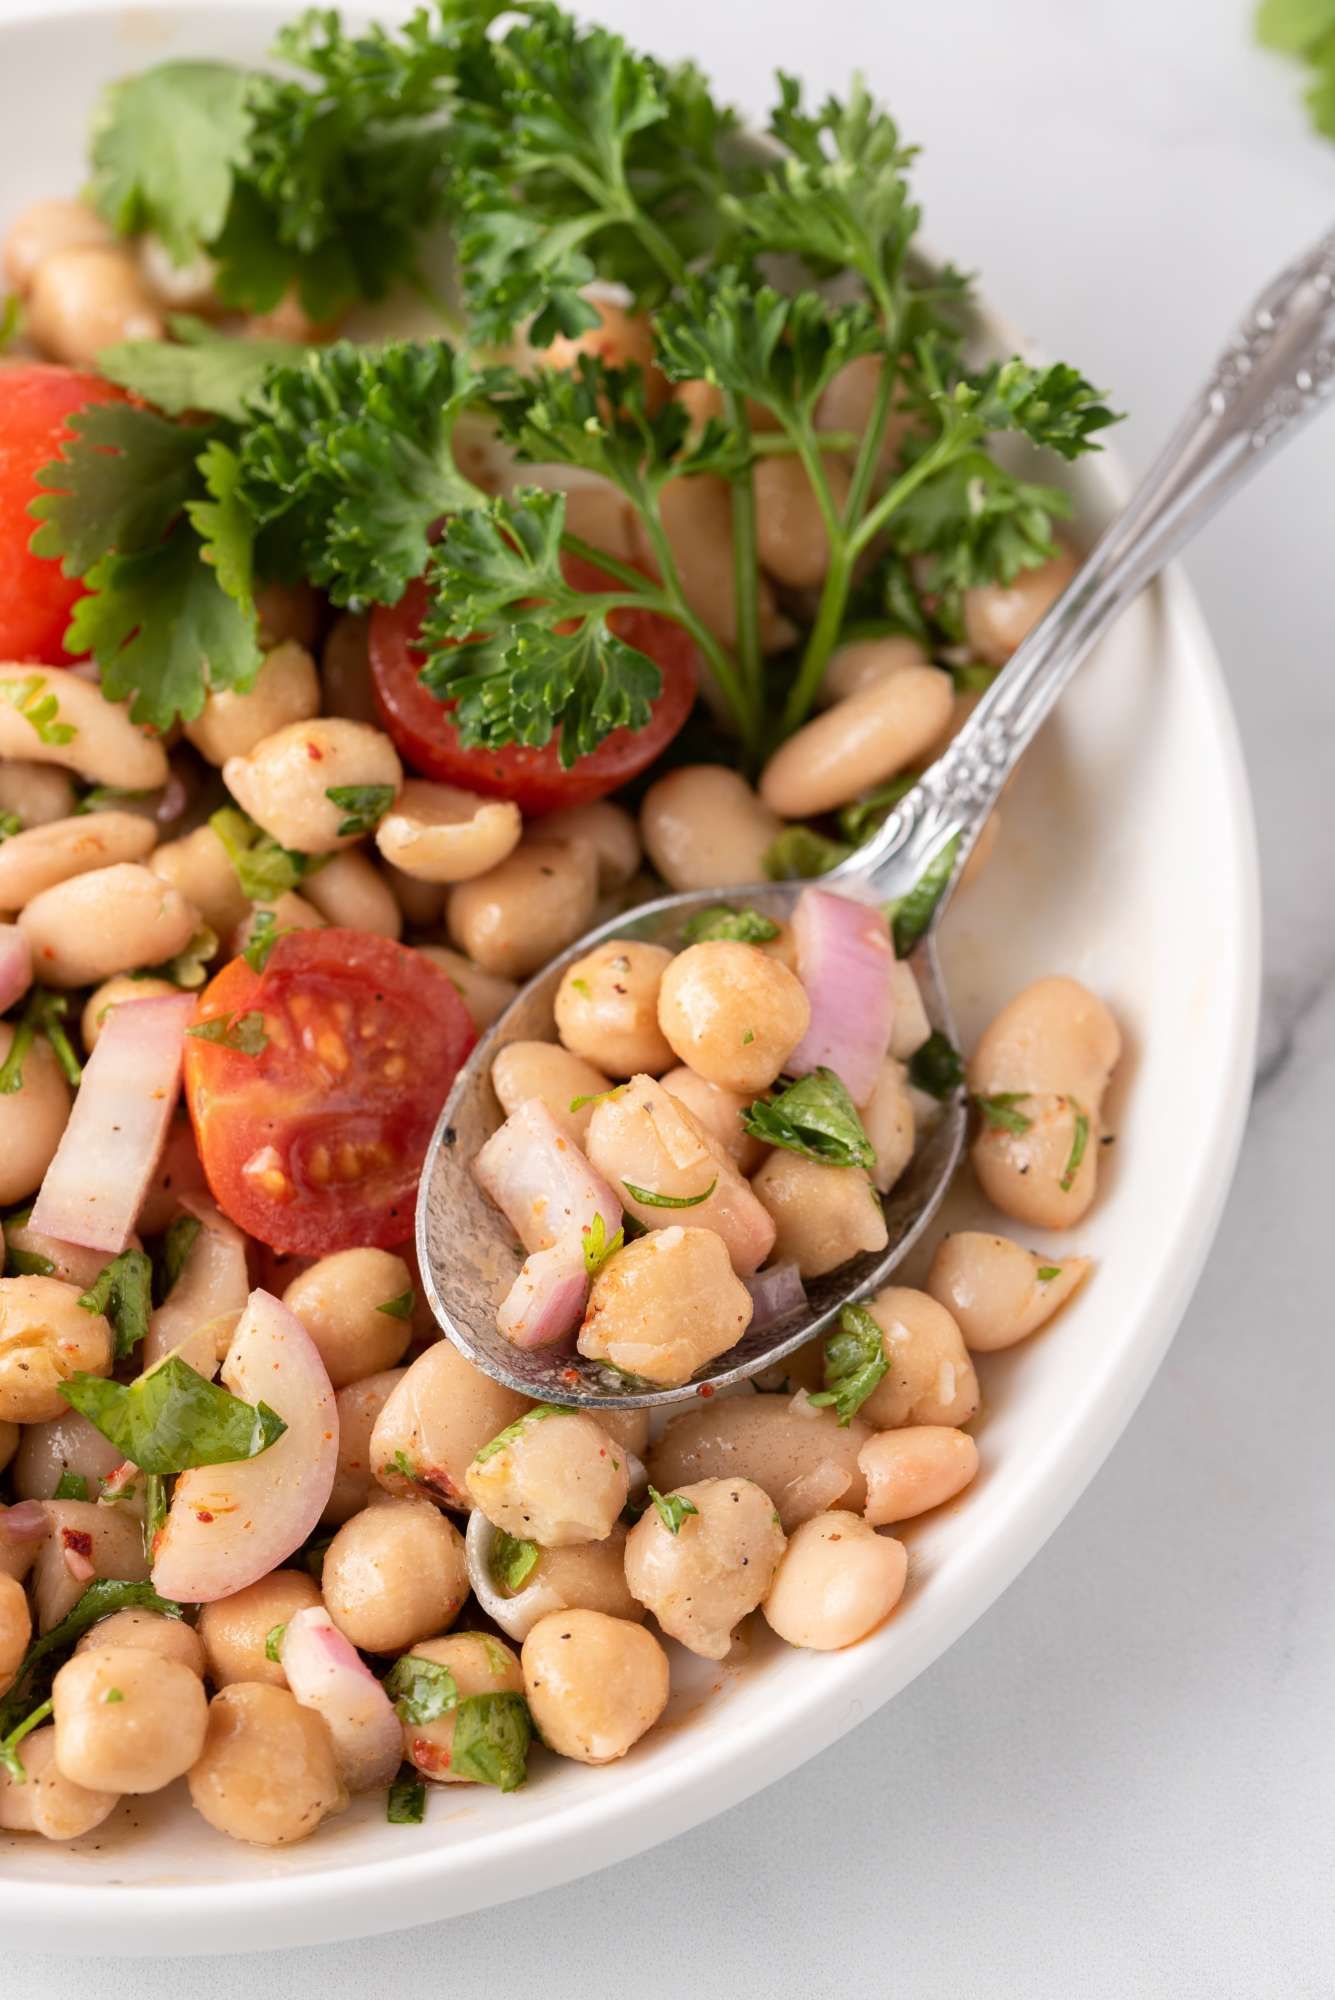 Chickpea and white bean salad with shallots, fresh herbs, and tomatoes in a bowl.